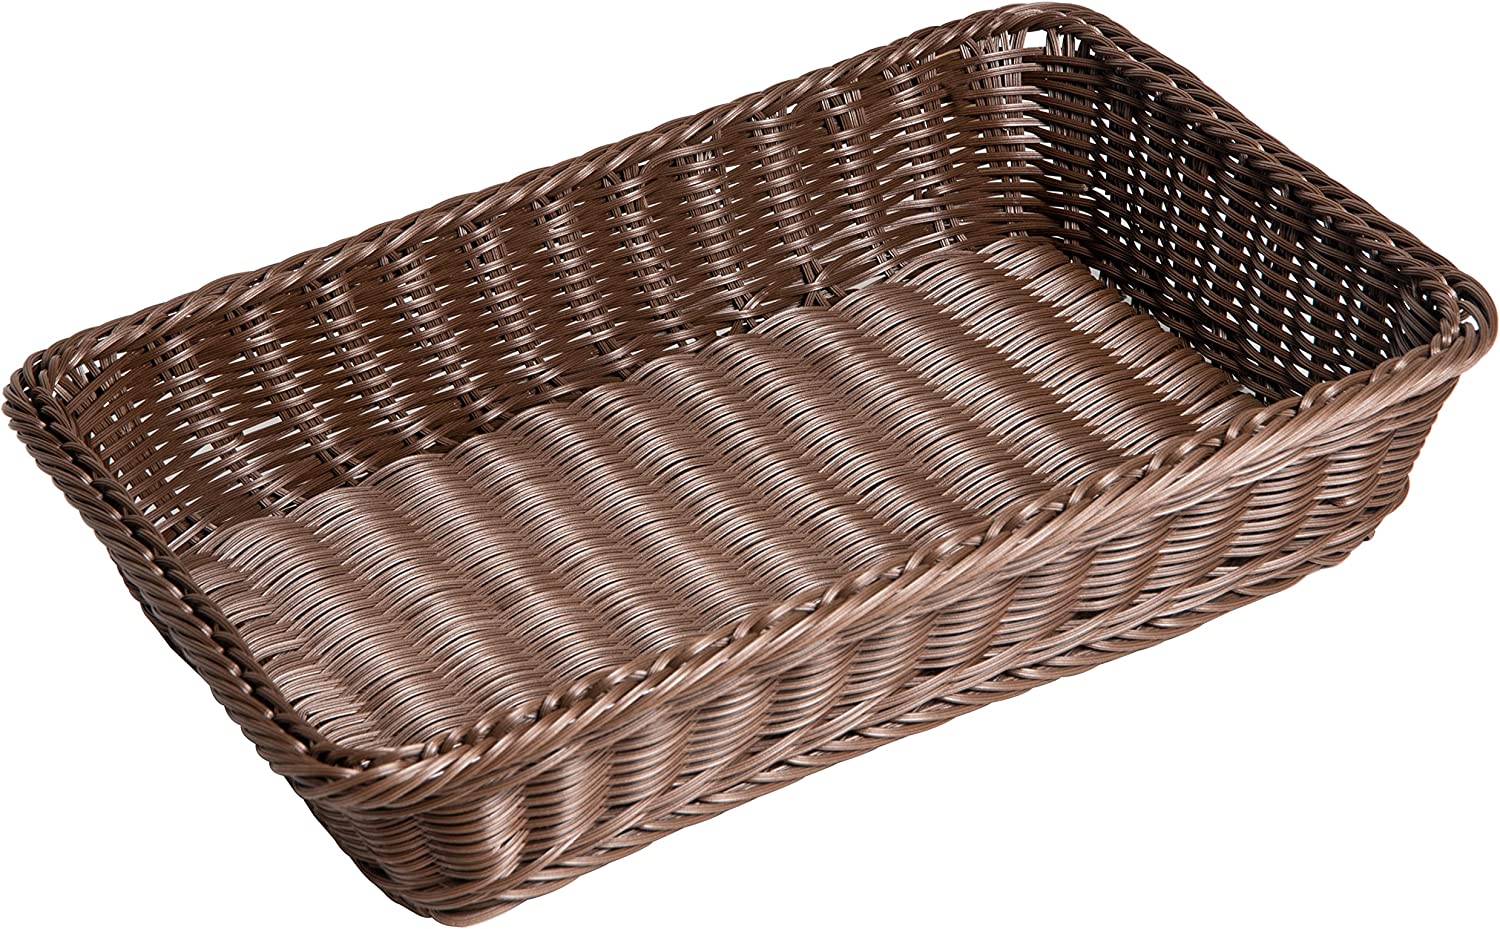 myHomeBody Wicker Basket With 3 Compartments, Woven Baskets for Organizing,  Storage Basket, Toilet Tank Basket, Bathroom Counter Organizer, Bedroom